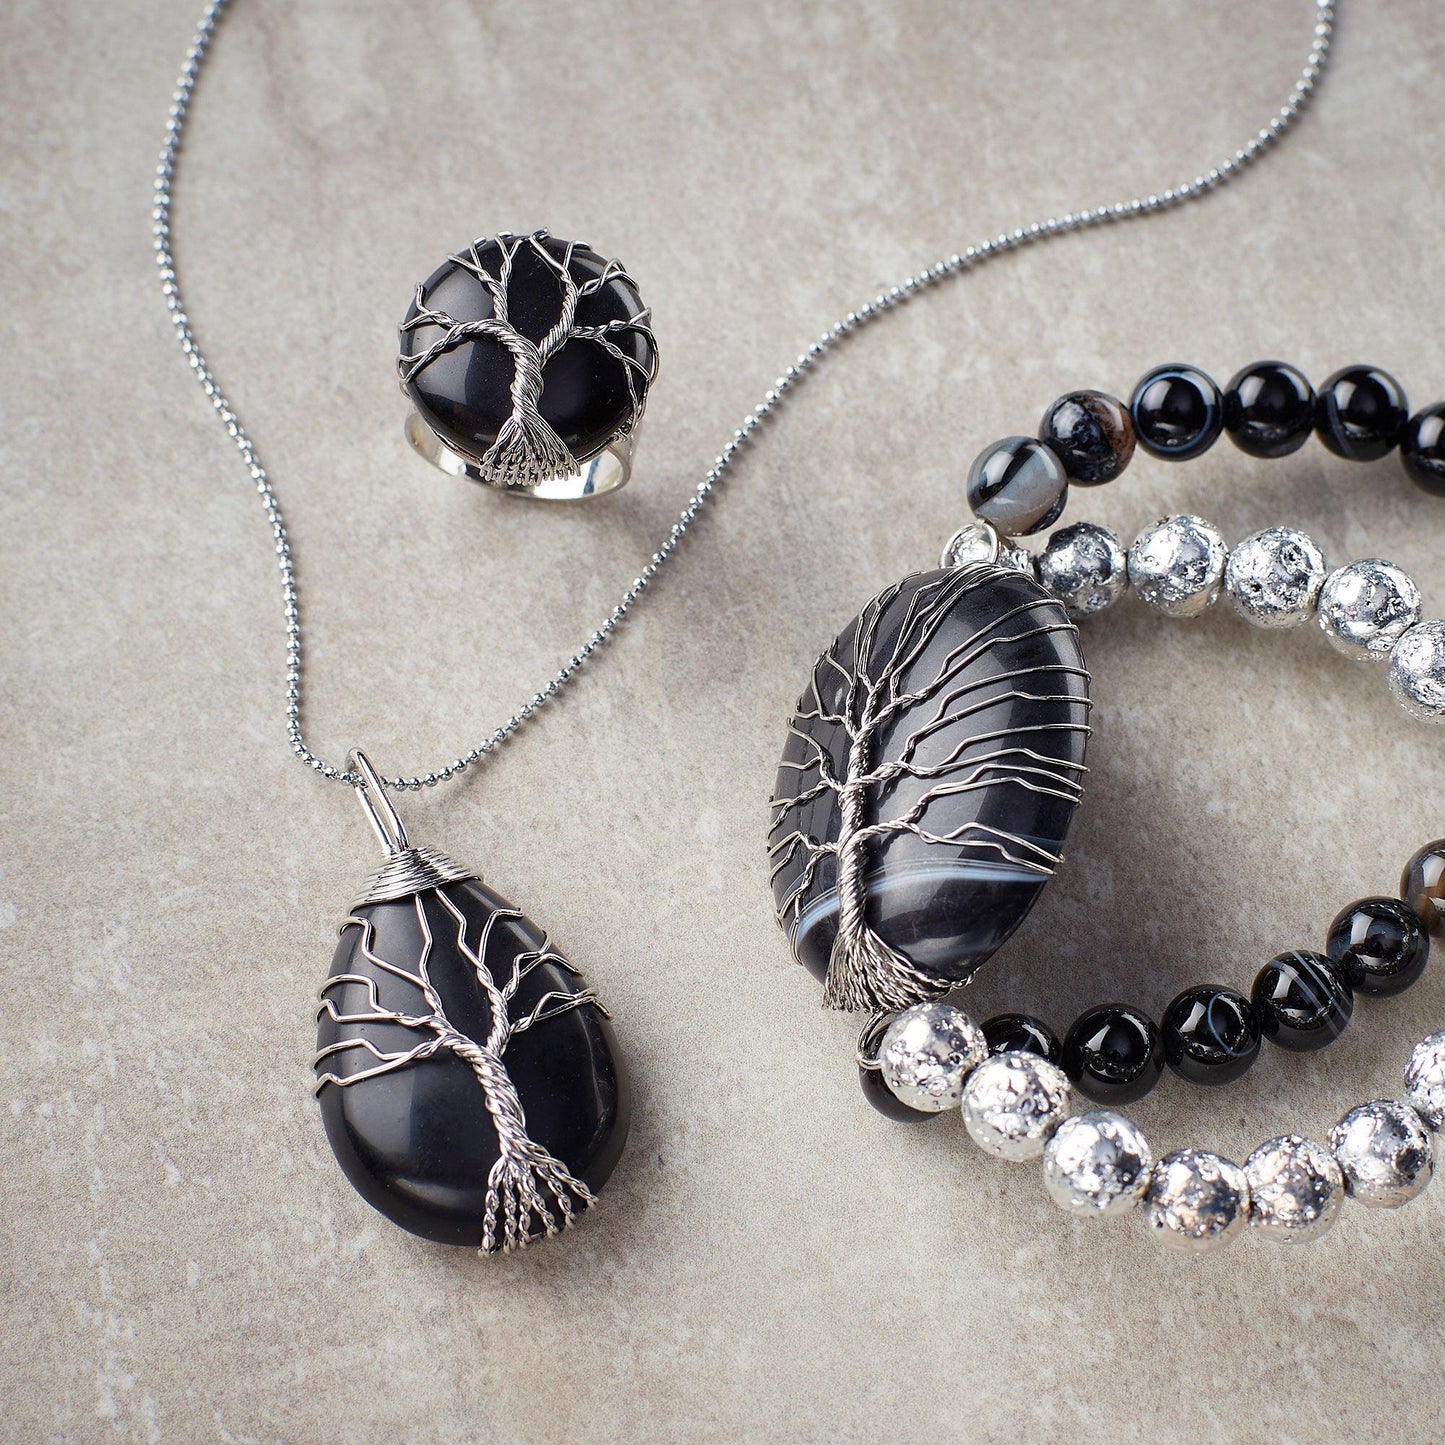 Black Agate Necklace - Wild Wings